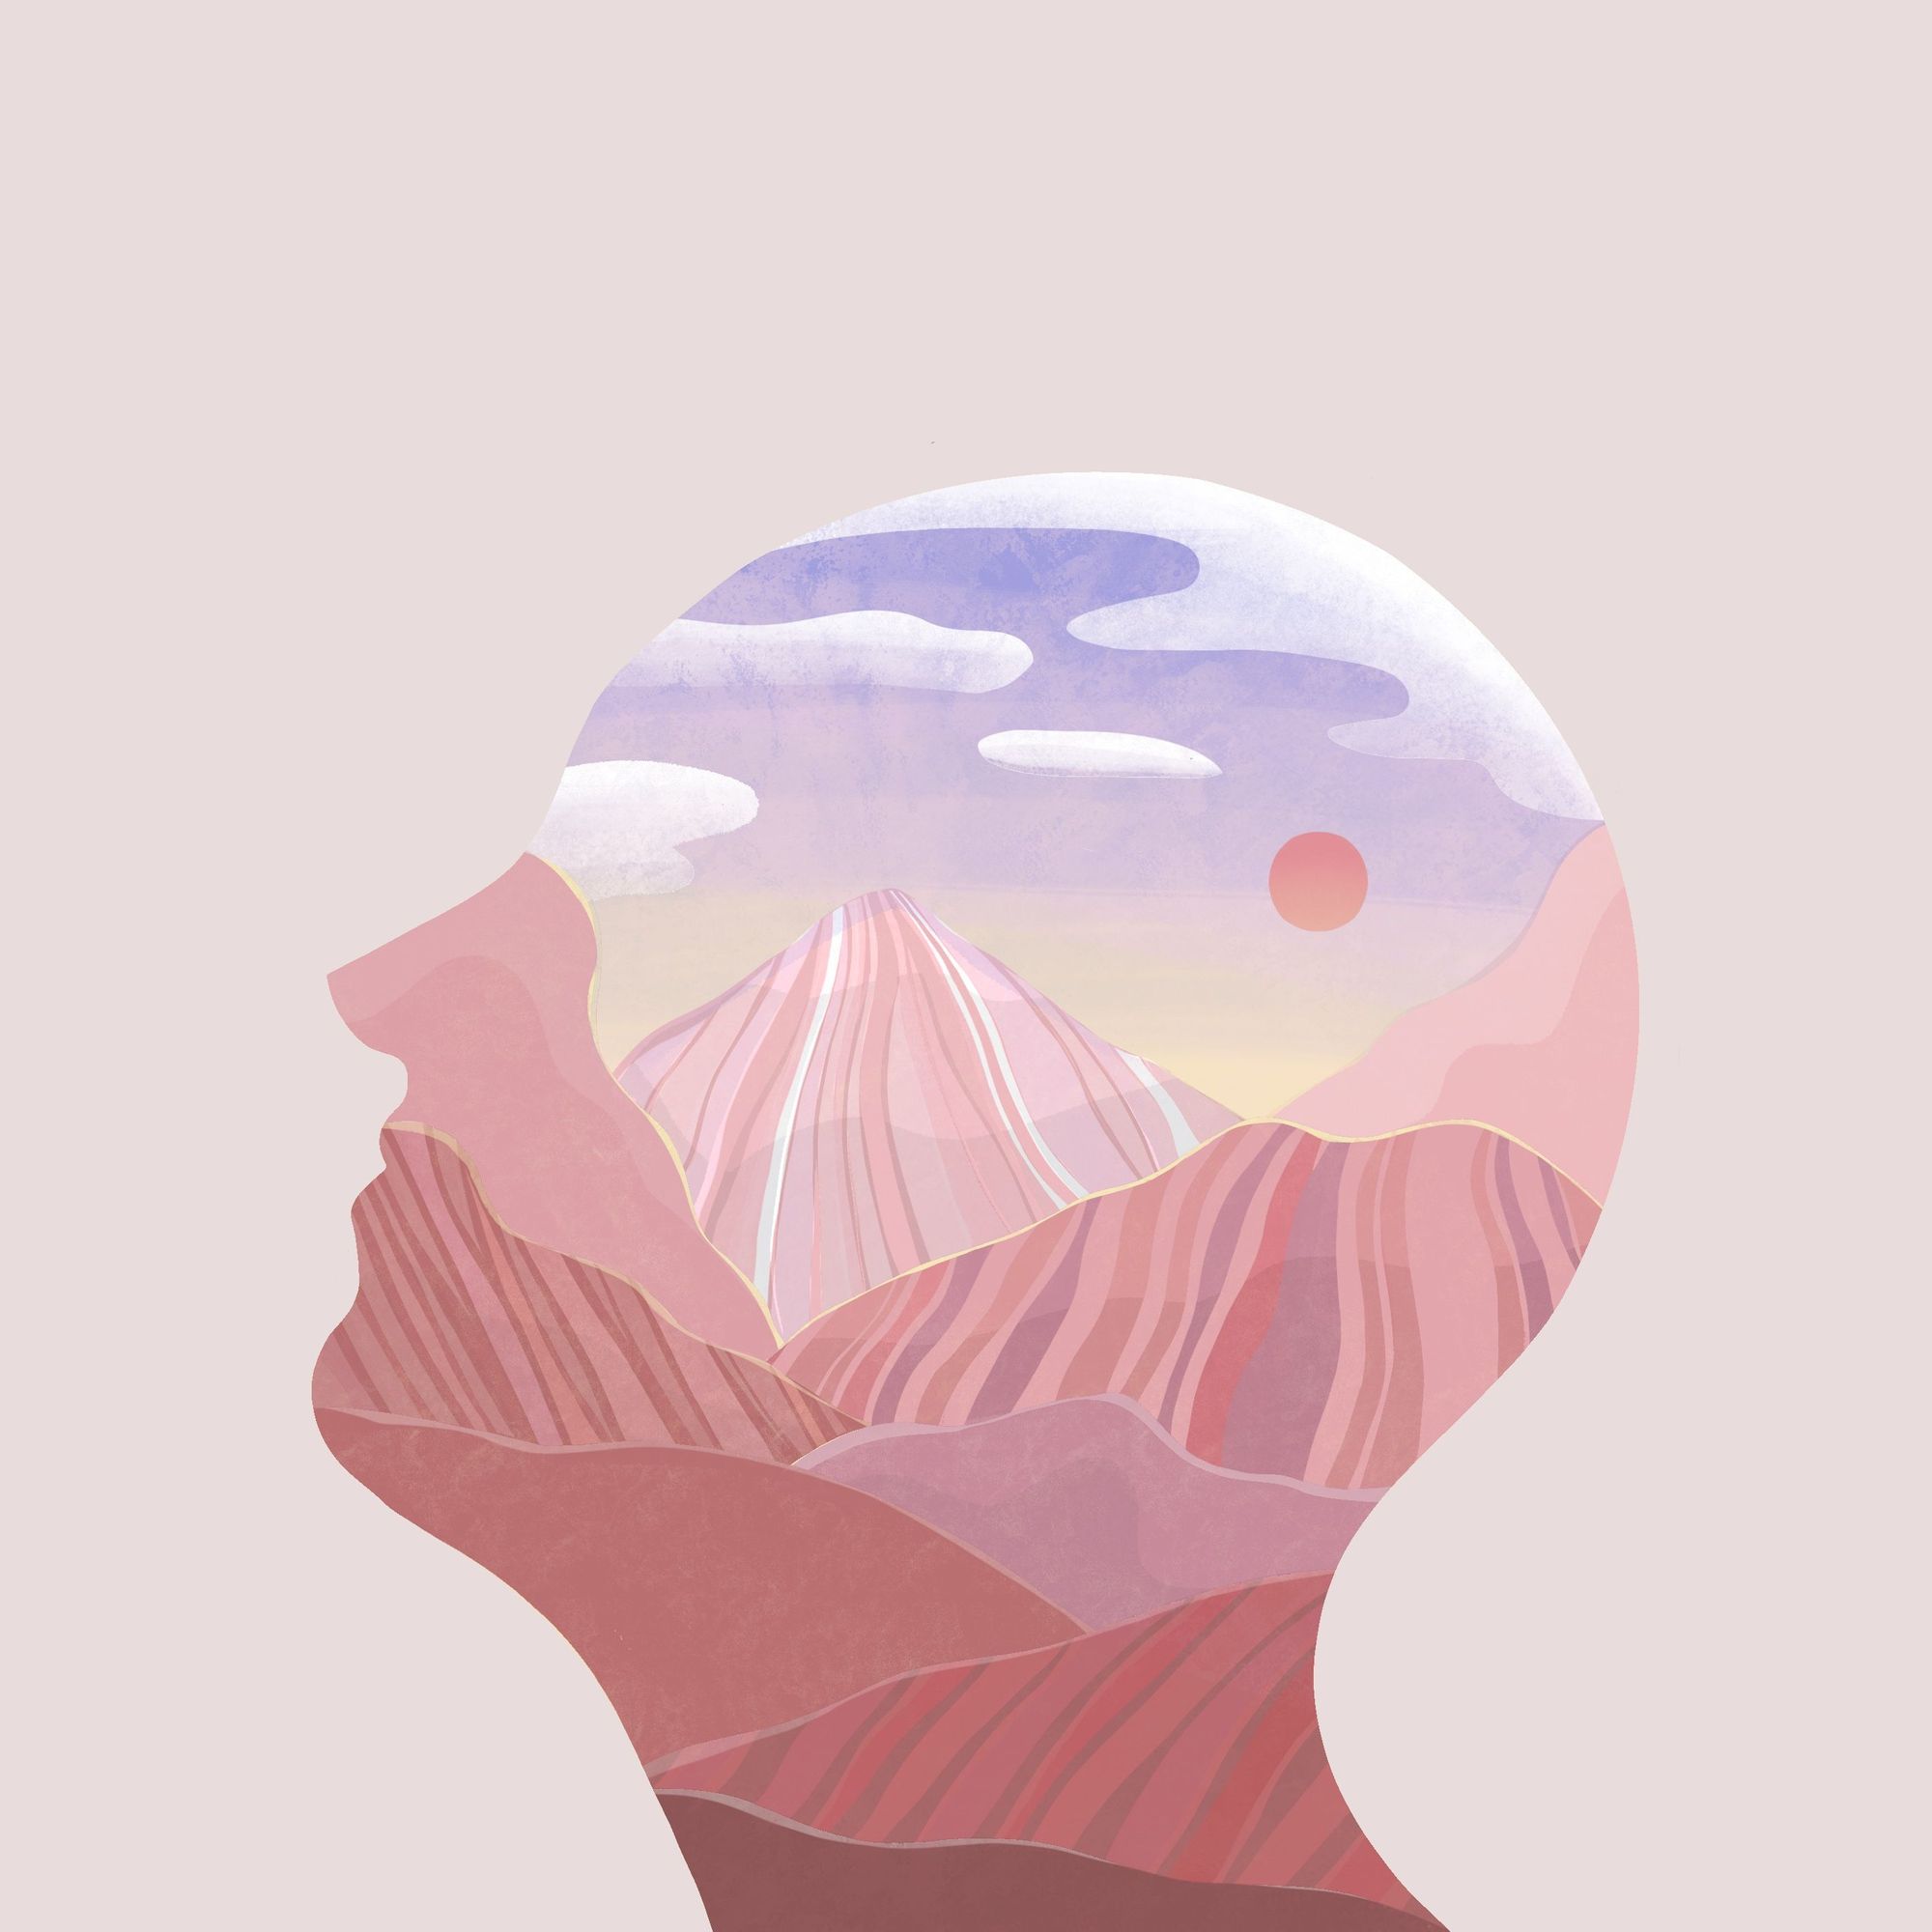 An illustration of a head filled with the image of mountains.